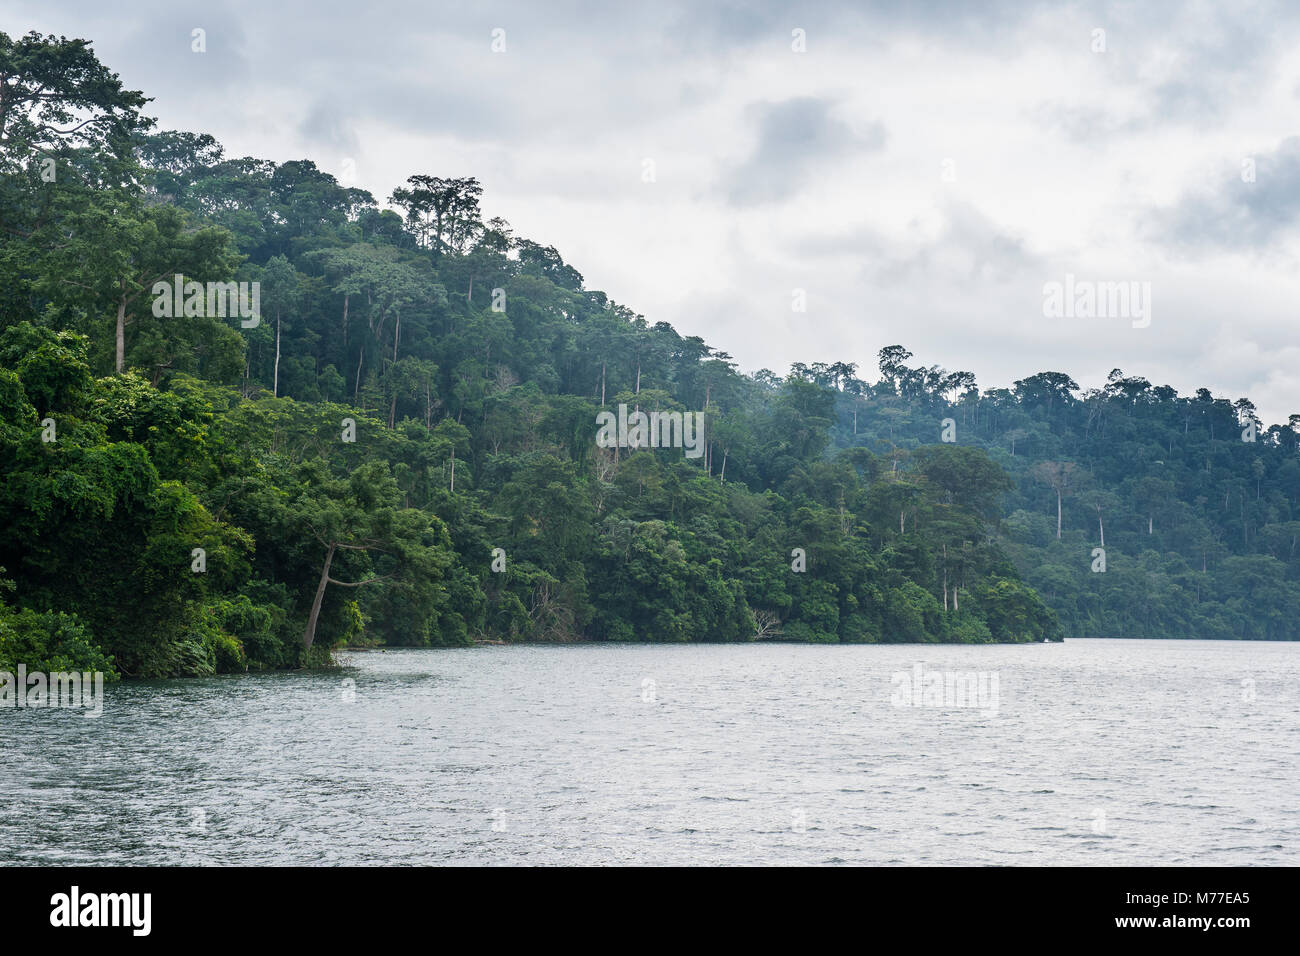 River and dense forest, Cameroon, Africa Stock Photo